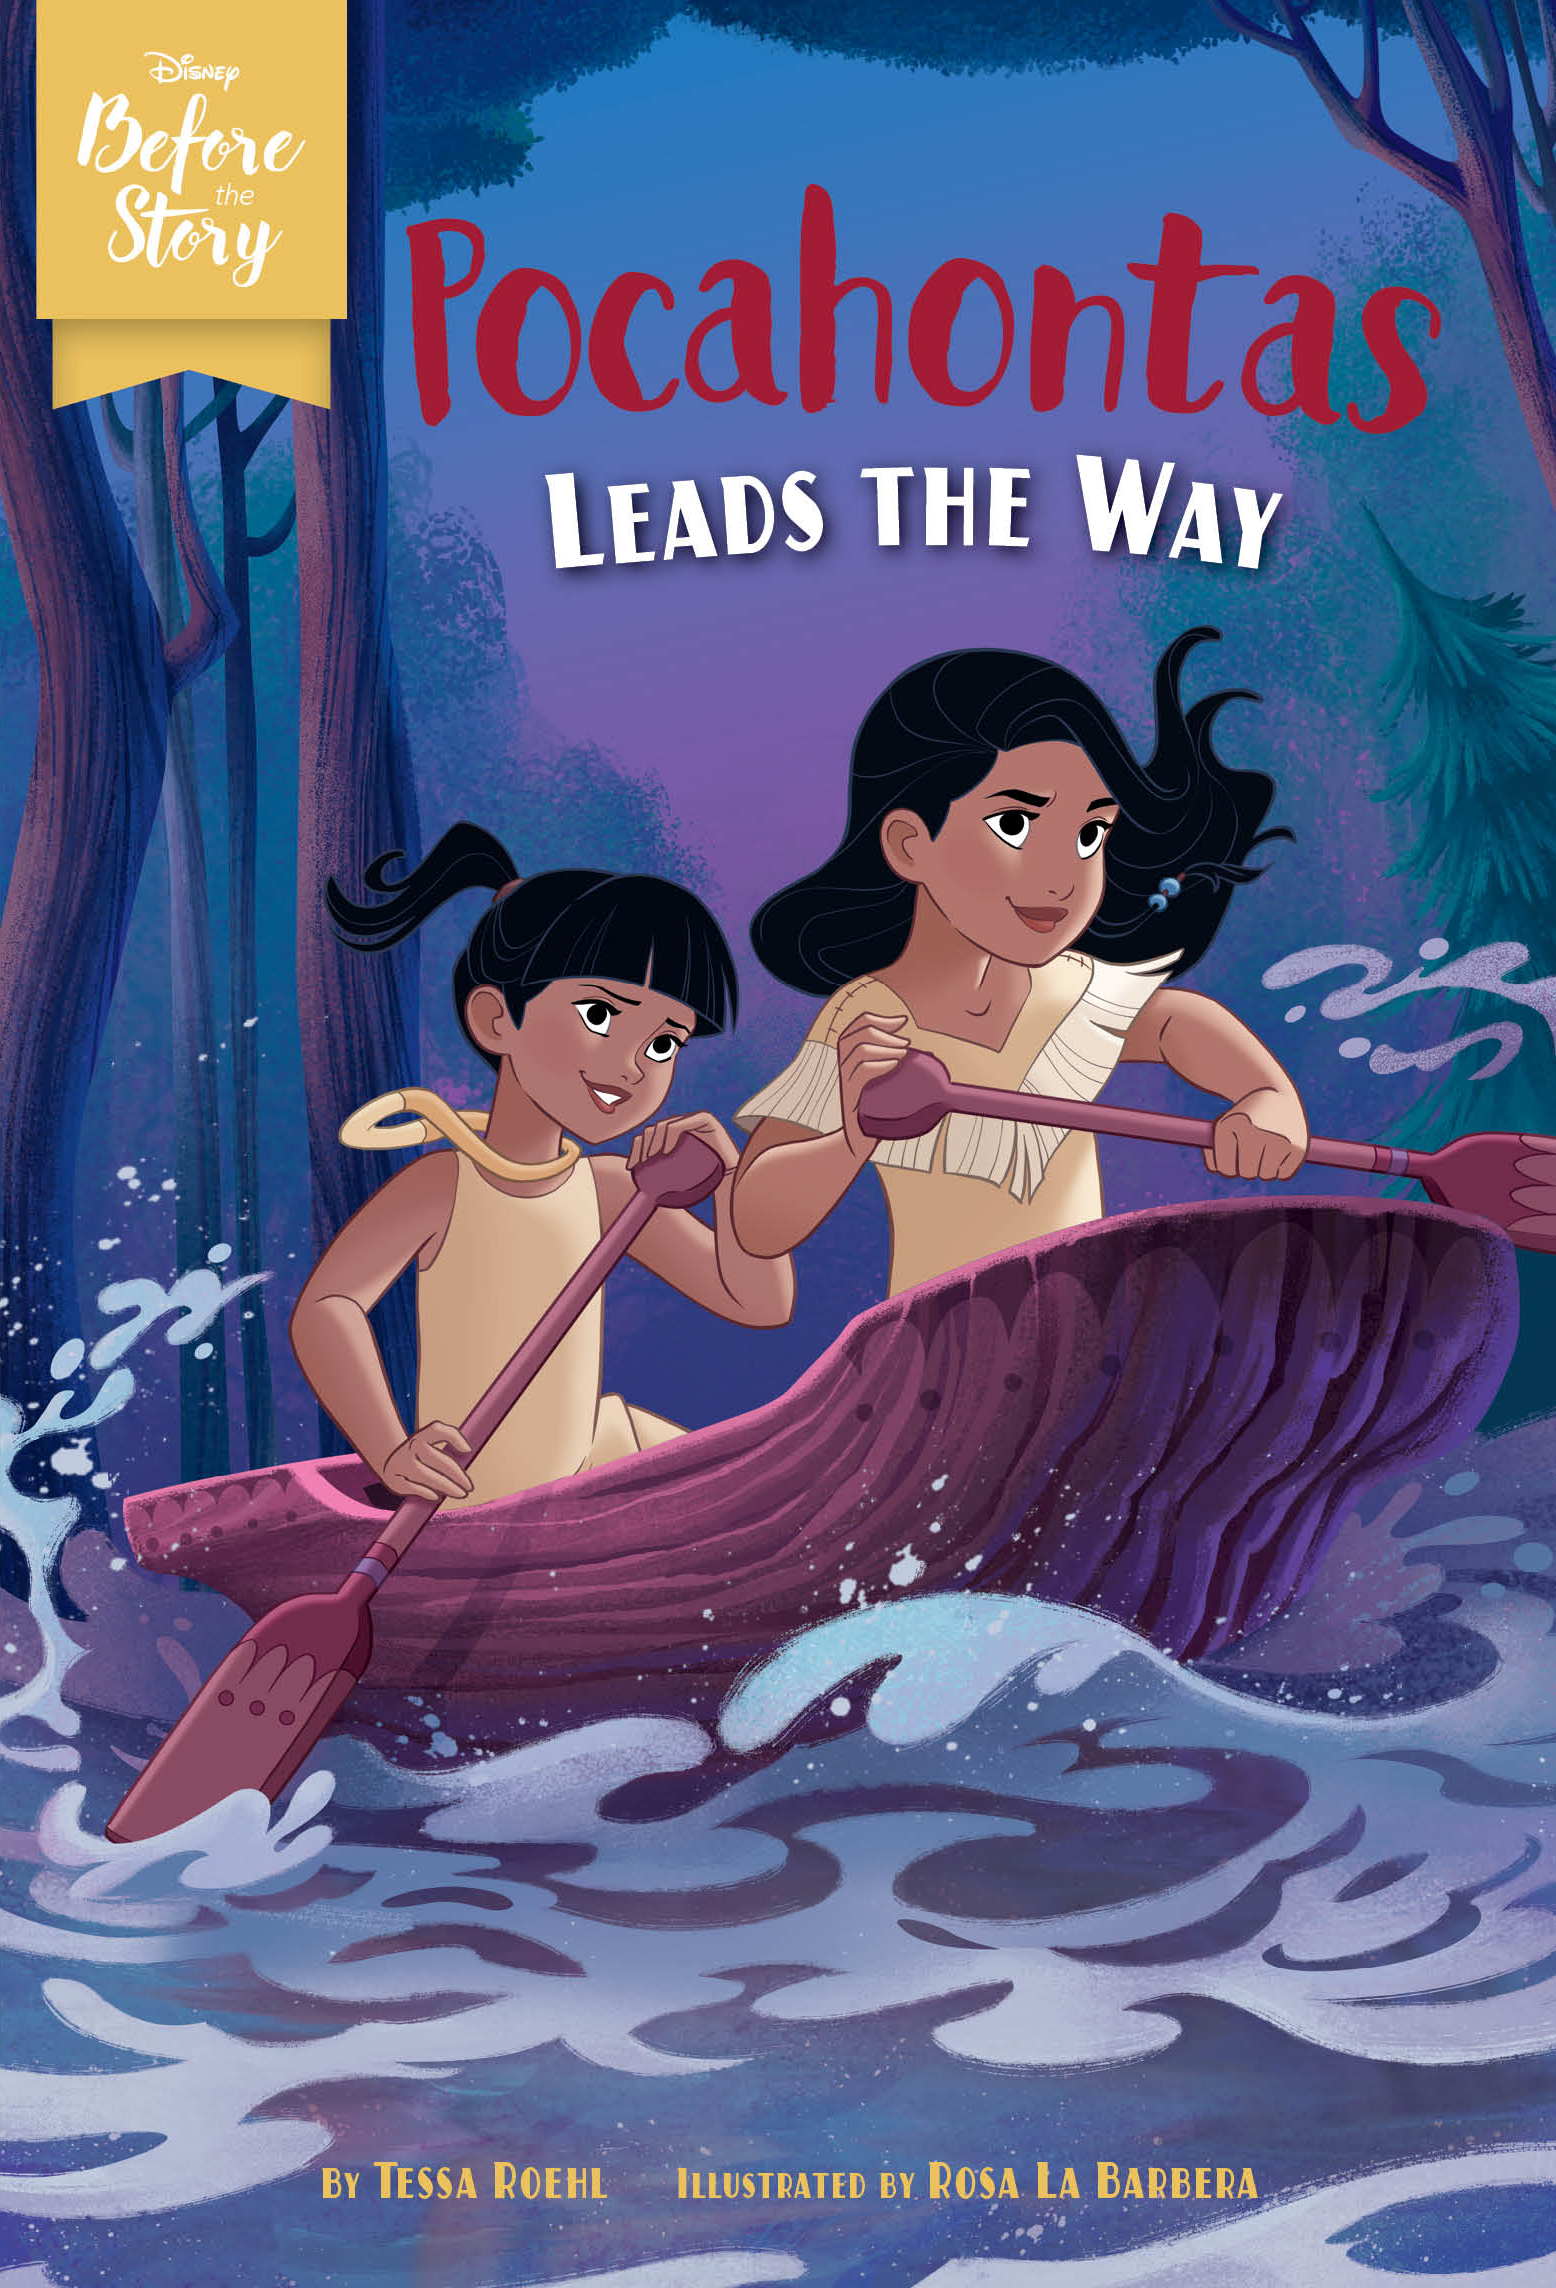 Disney Before the Story Pocahontas Leads the Way by Tessa